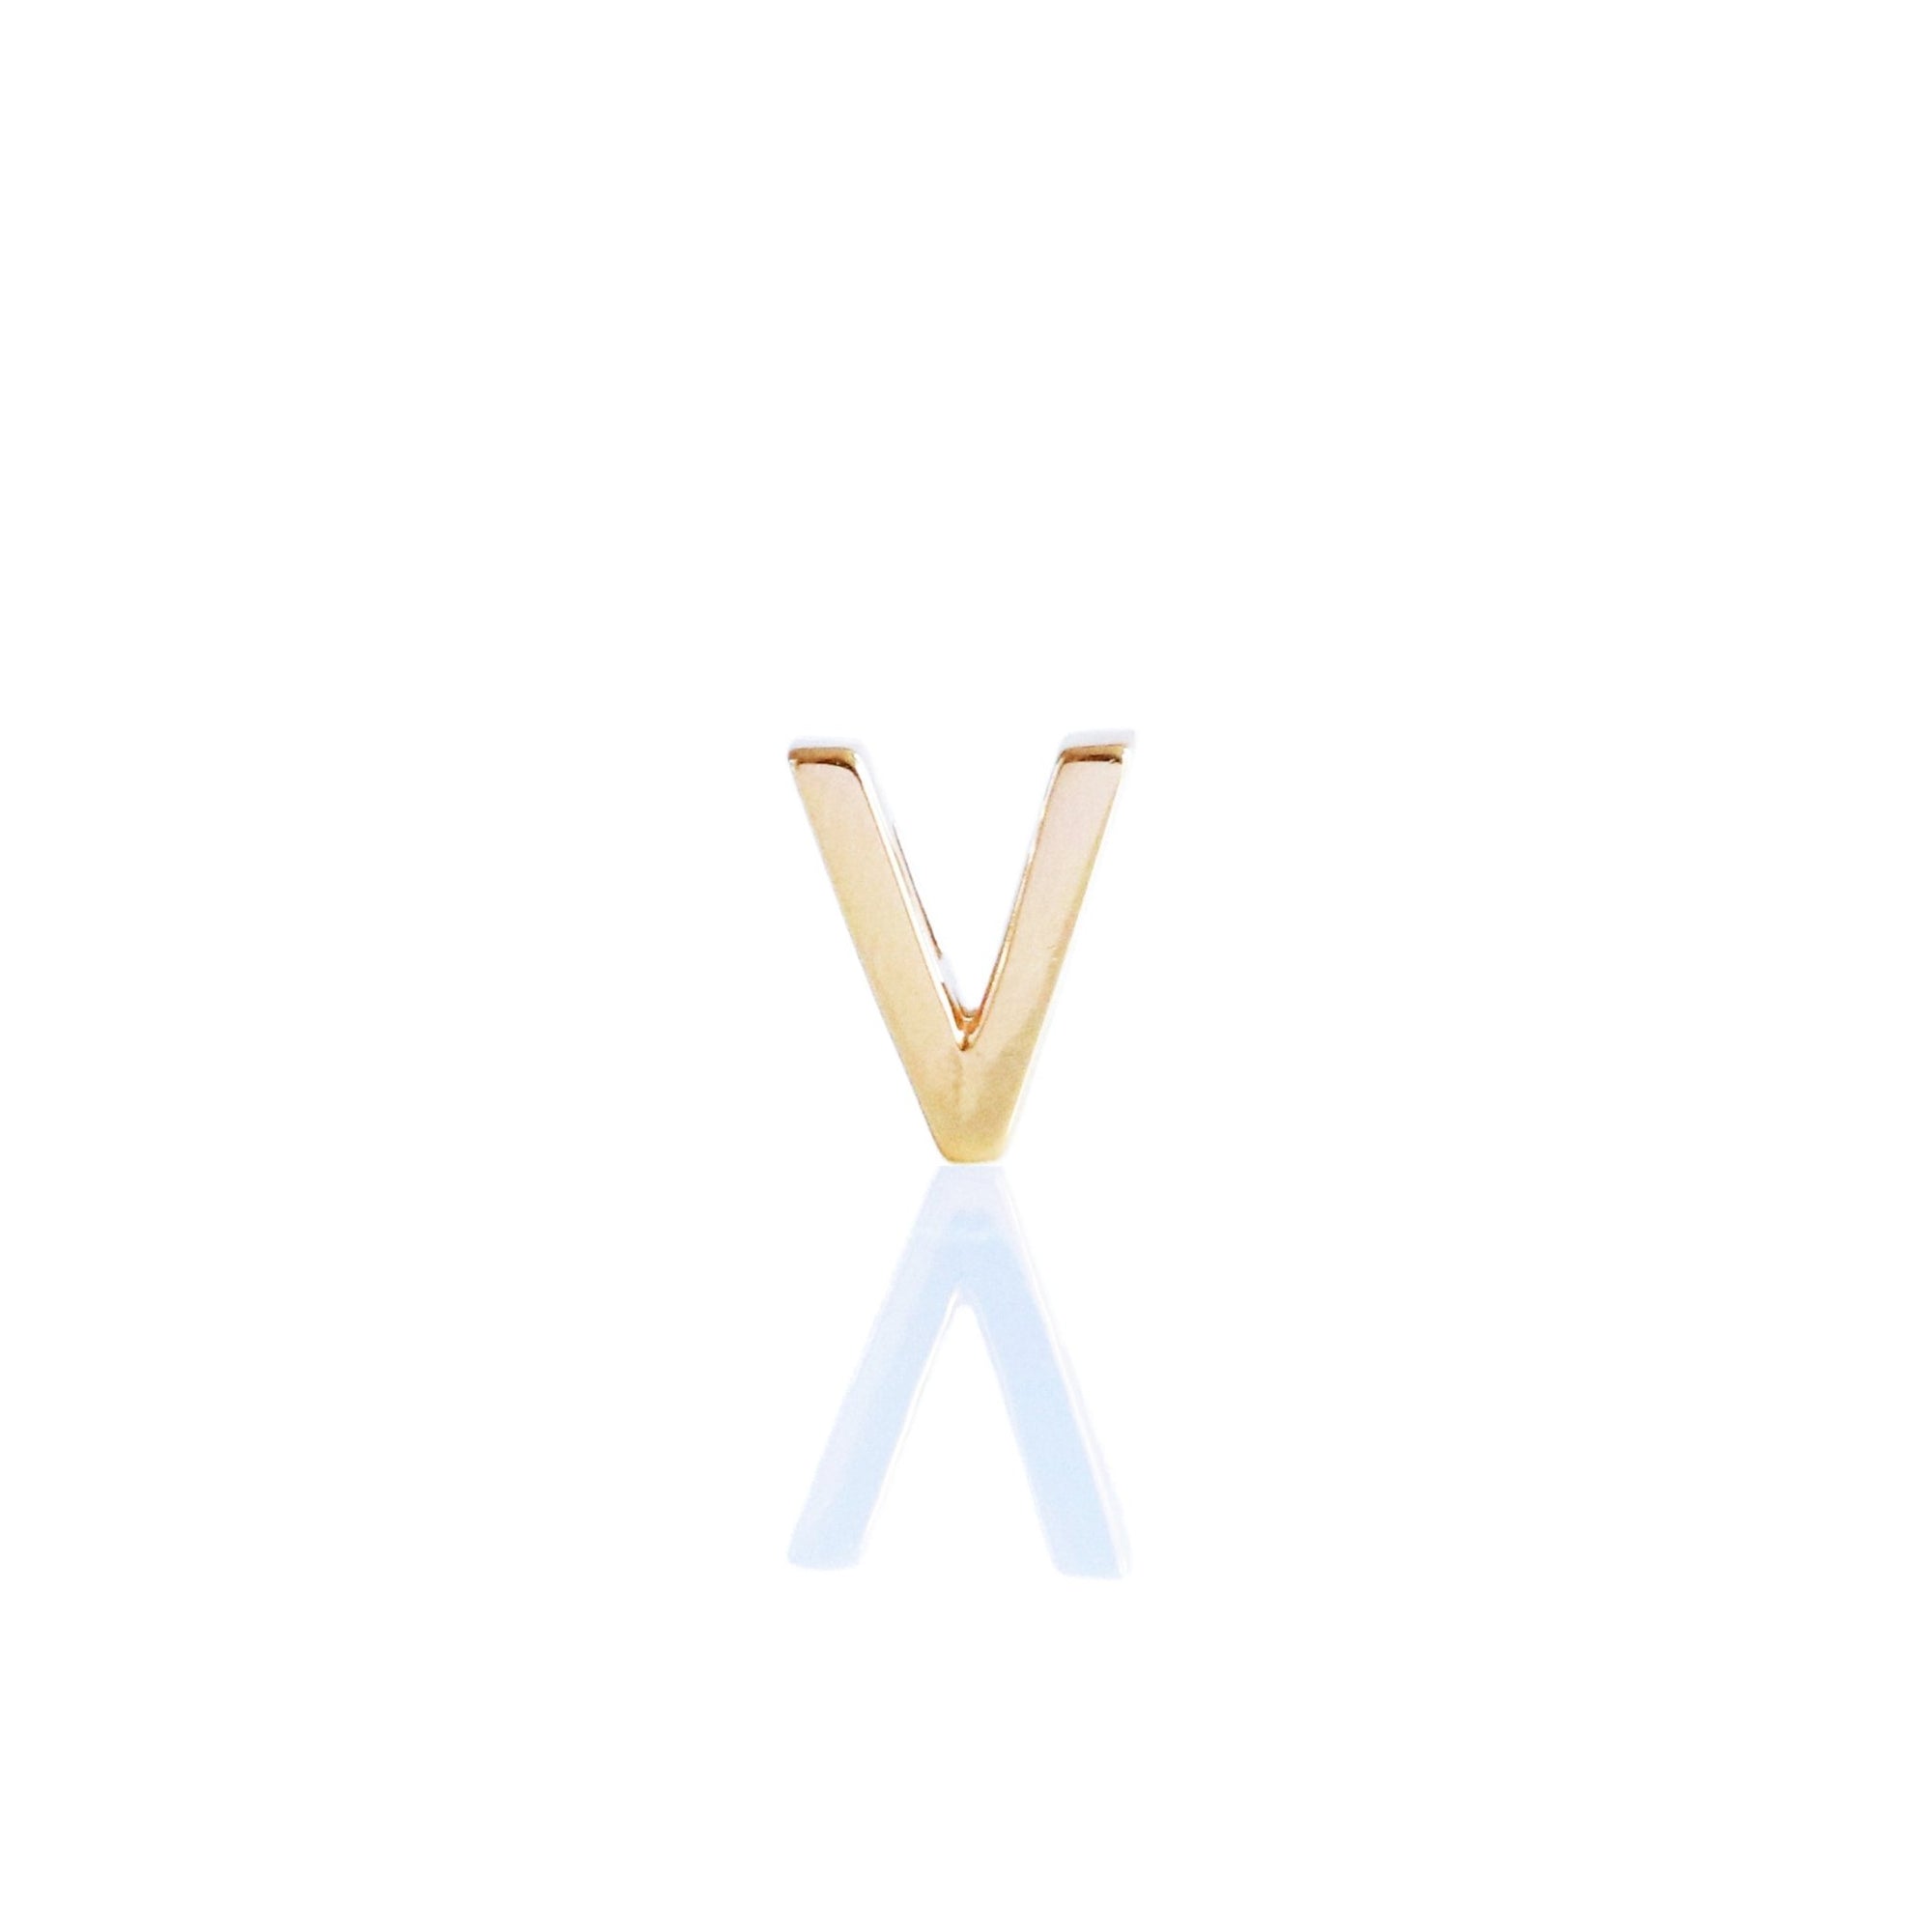 CHARMED INITIAL - V - GOLD OR SILVER - SO PRETTY CARA COTTER